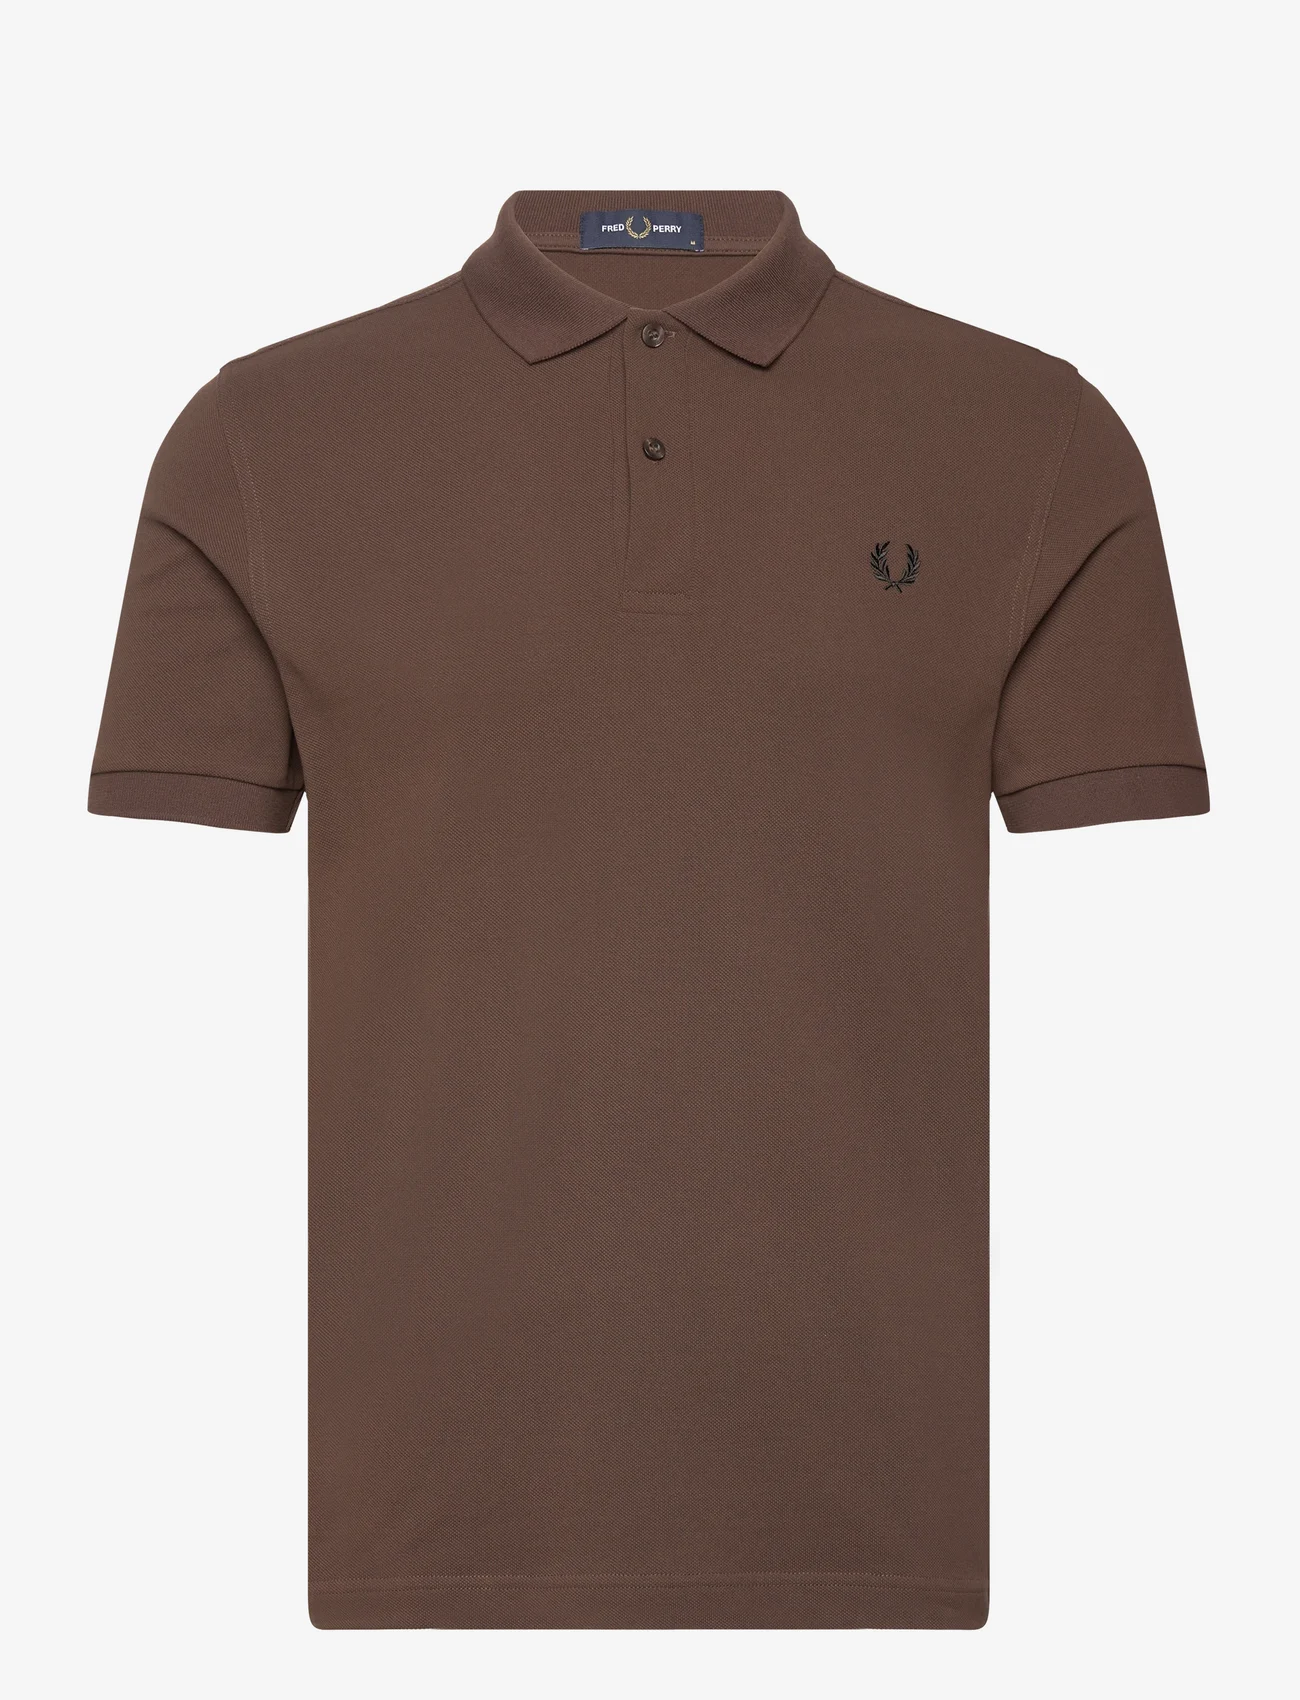 Fred Perry - THE FRED PERRY SHIRT - lühikeste varrukatega polod - burnt tobacco - 0